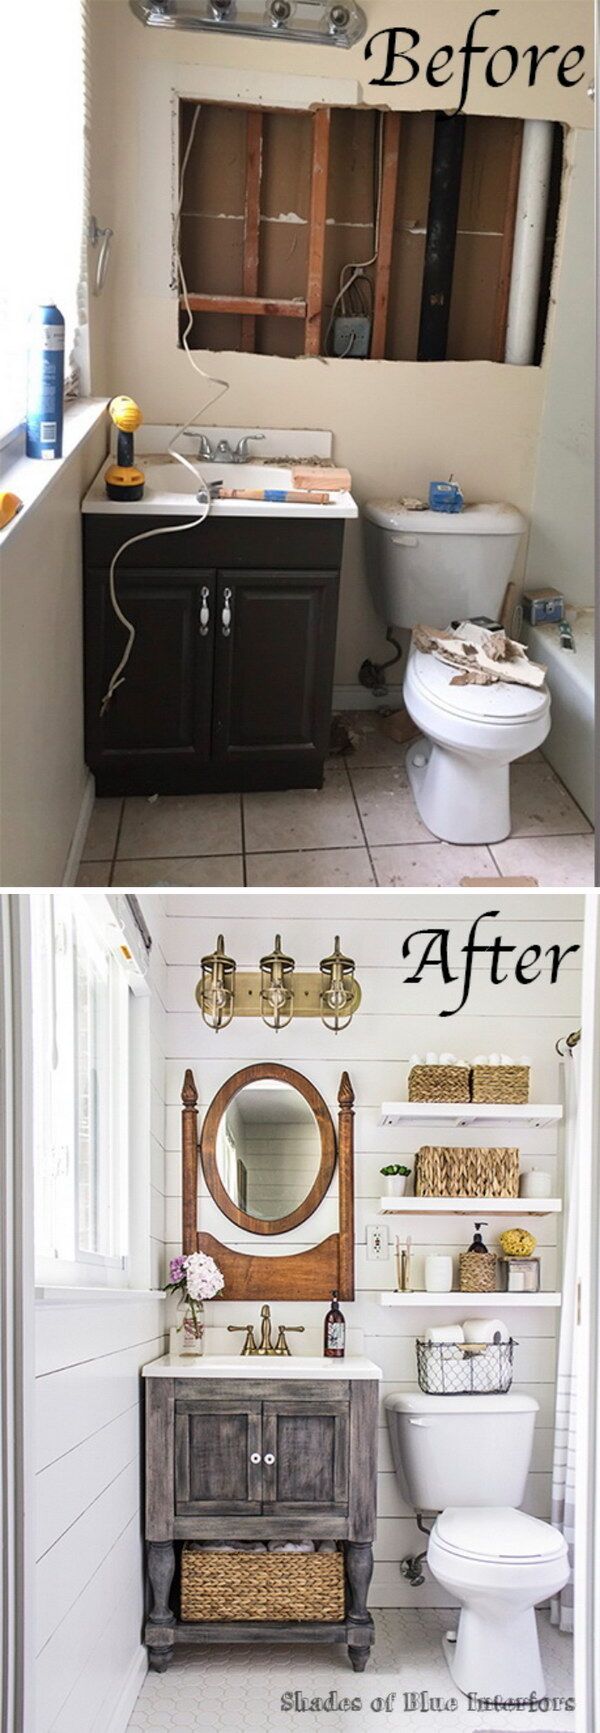 Before and After Master Bathroom Makeover. 